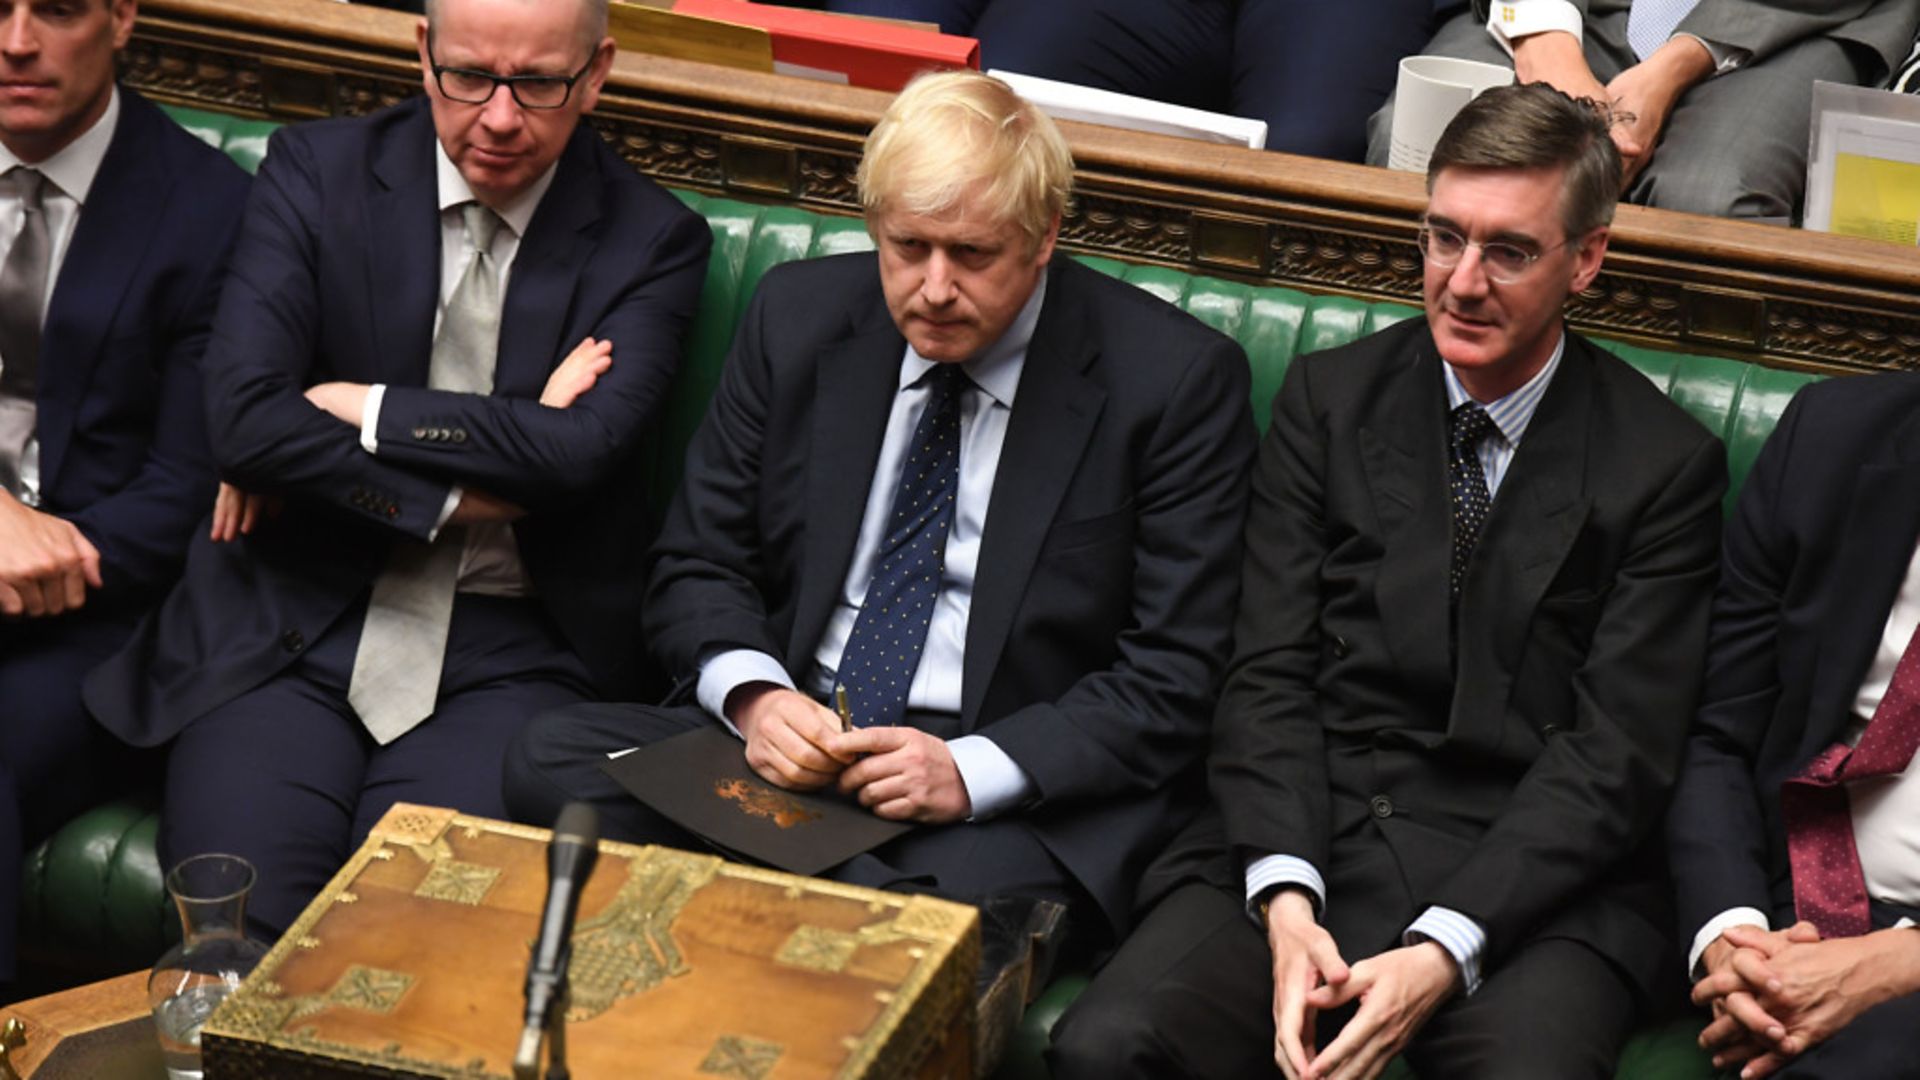 Boris Johnson (centre) in the House of Commons with Michael Gove and Jacob Rees-Mogg - Credit: PA